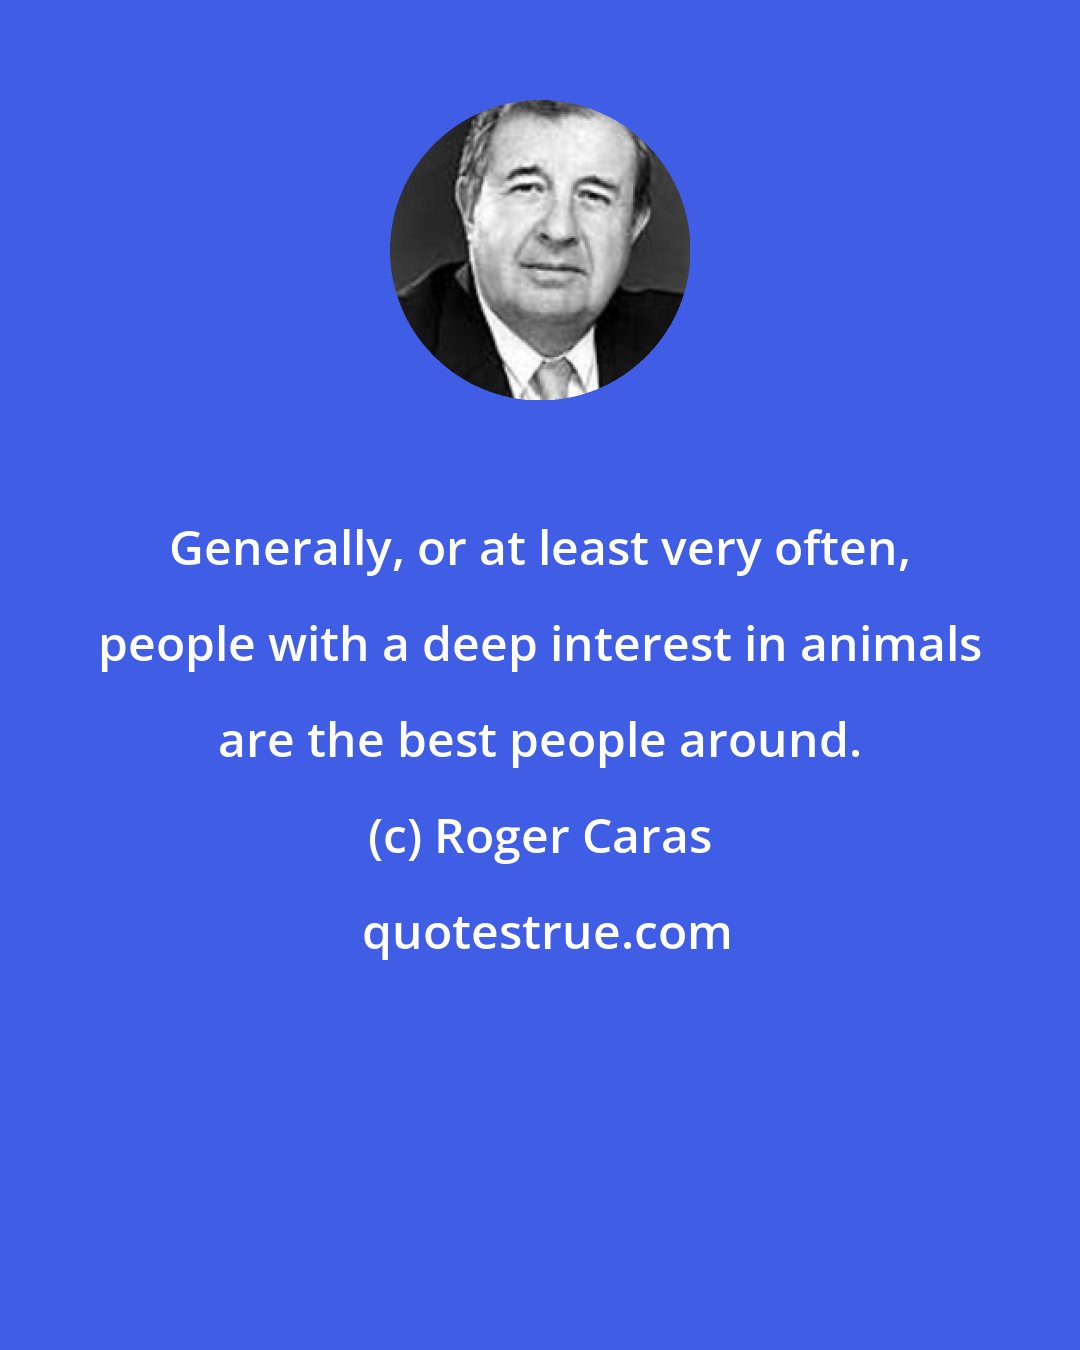 Roger Caras: Generally, or at least very often, people with a deep interest in animals are the best people around.